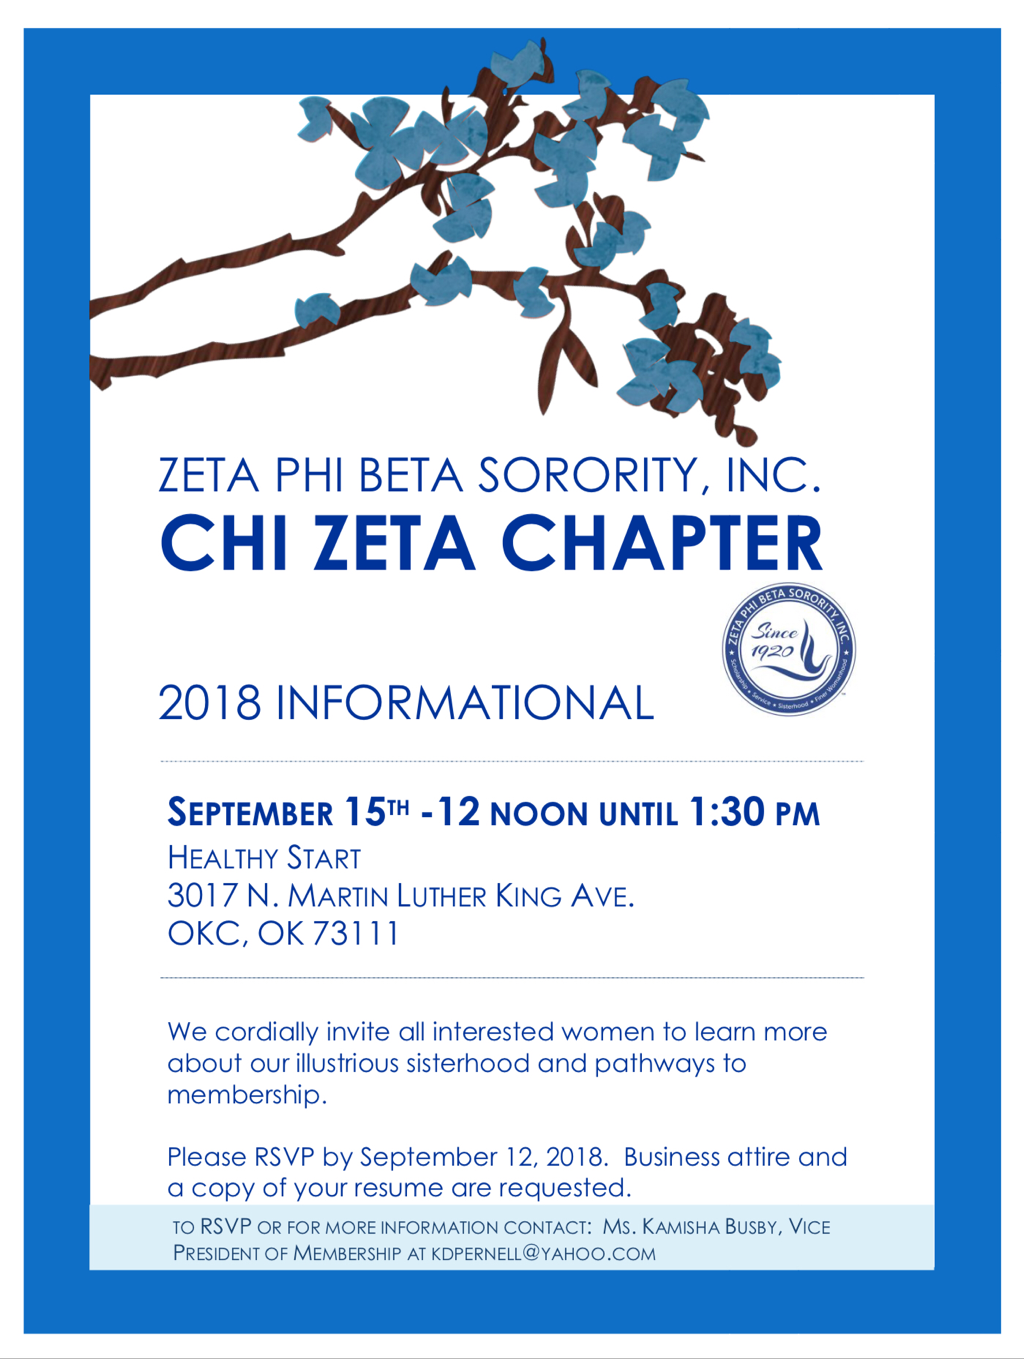 FACTS ABOUT ZETA YOU SHOULD KNOW 